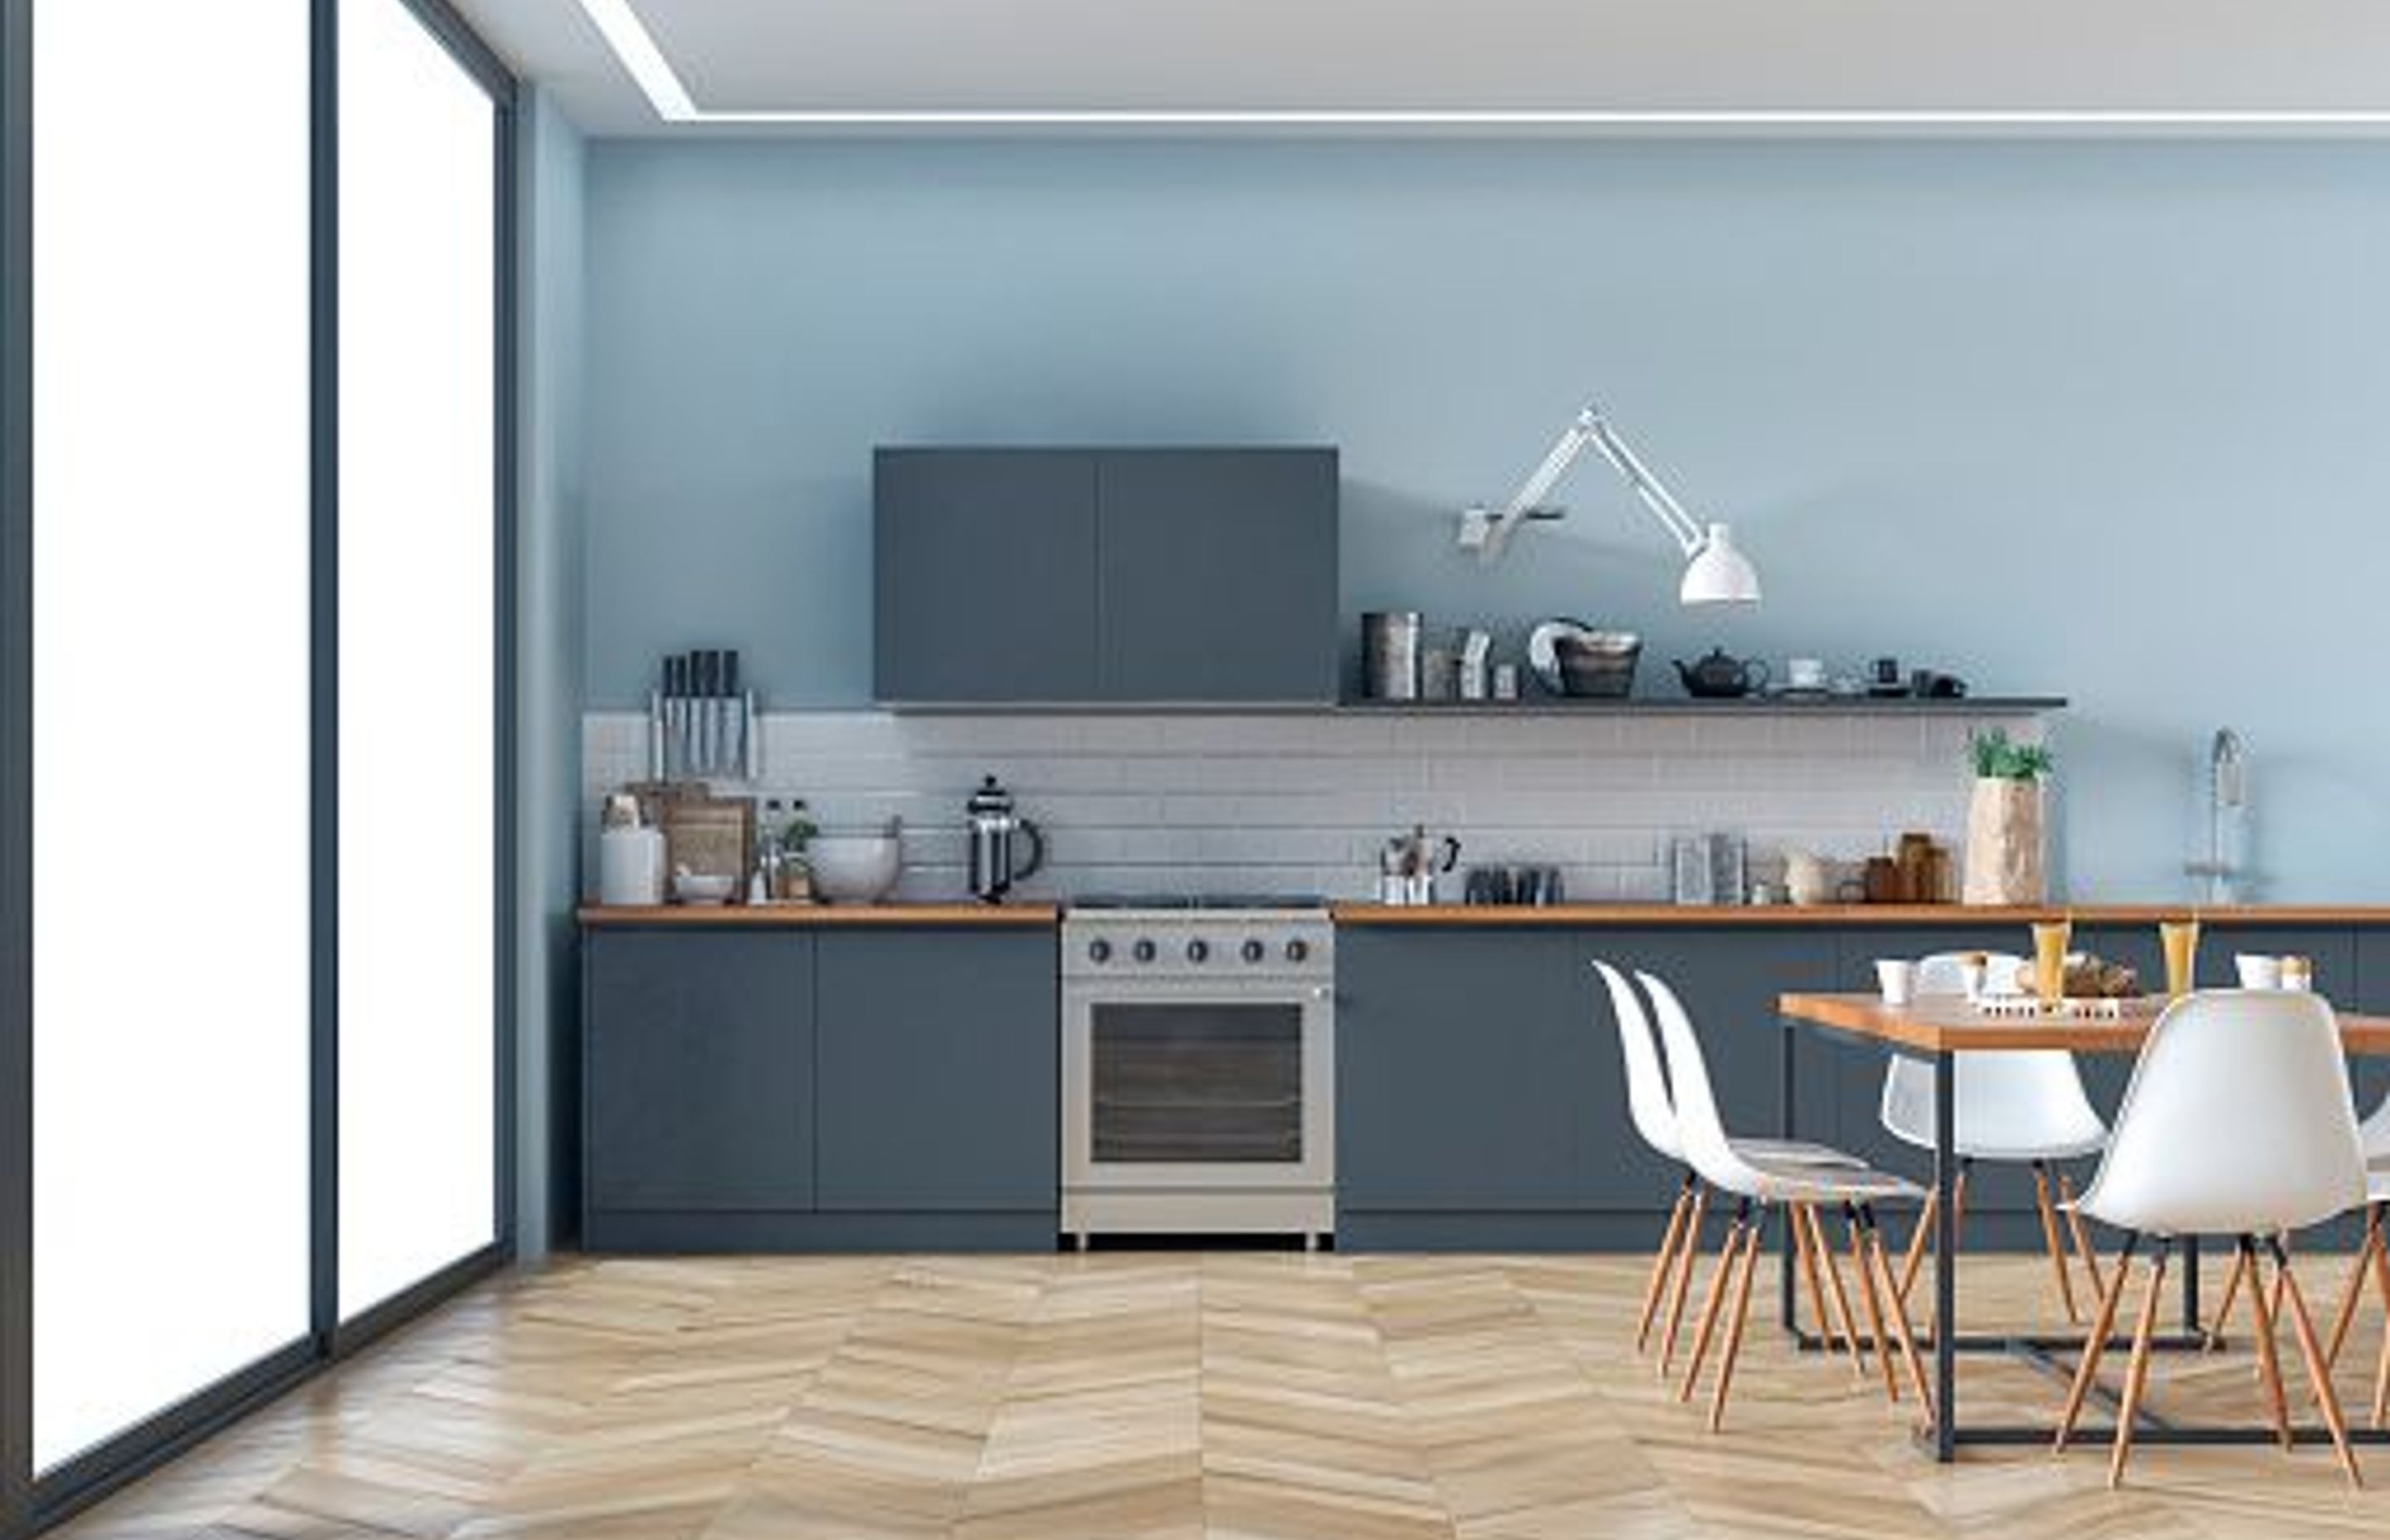 Use of Different Shade of Blue in a Kitchen | Photo Credit - iStock